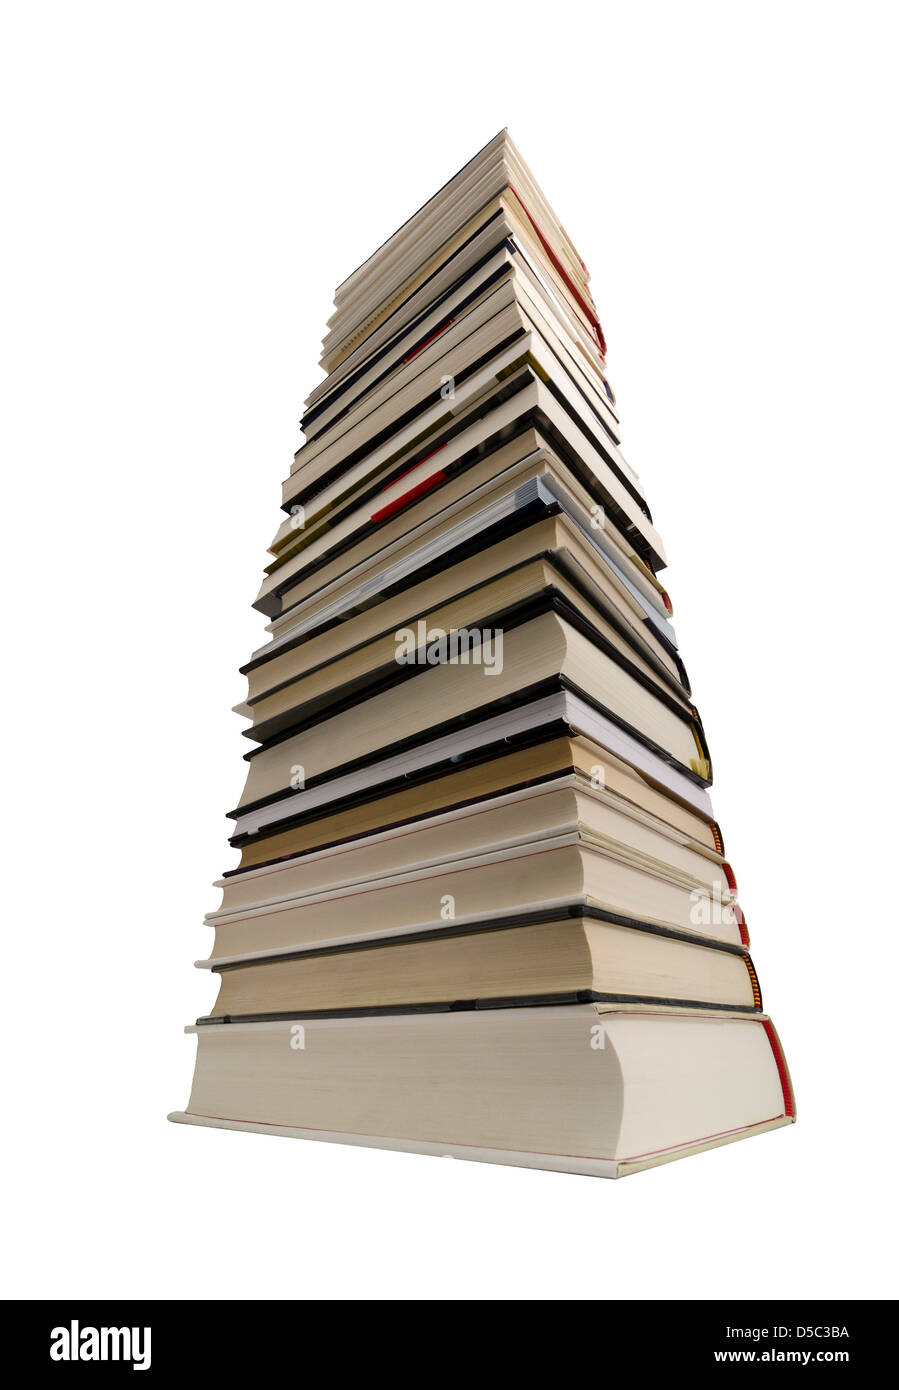 A very tall stack of books. Perspective view that is reminiscent of a skyscraper. Stock Photo